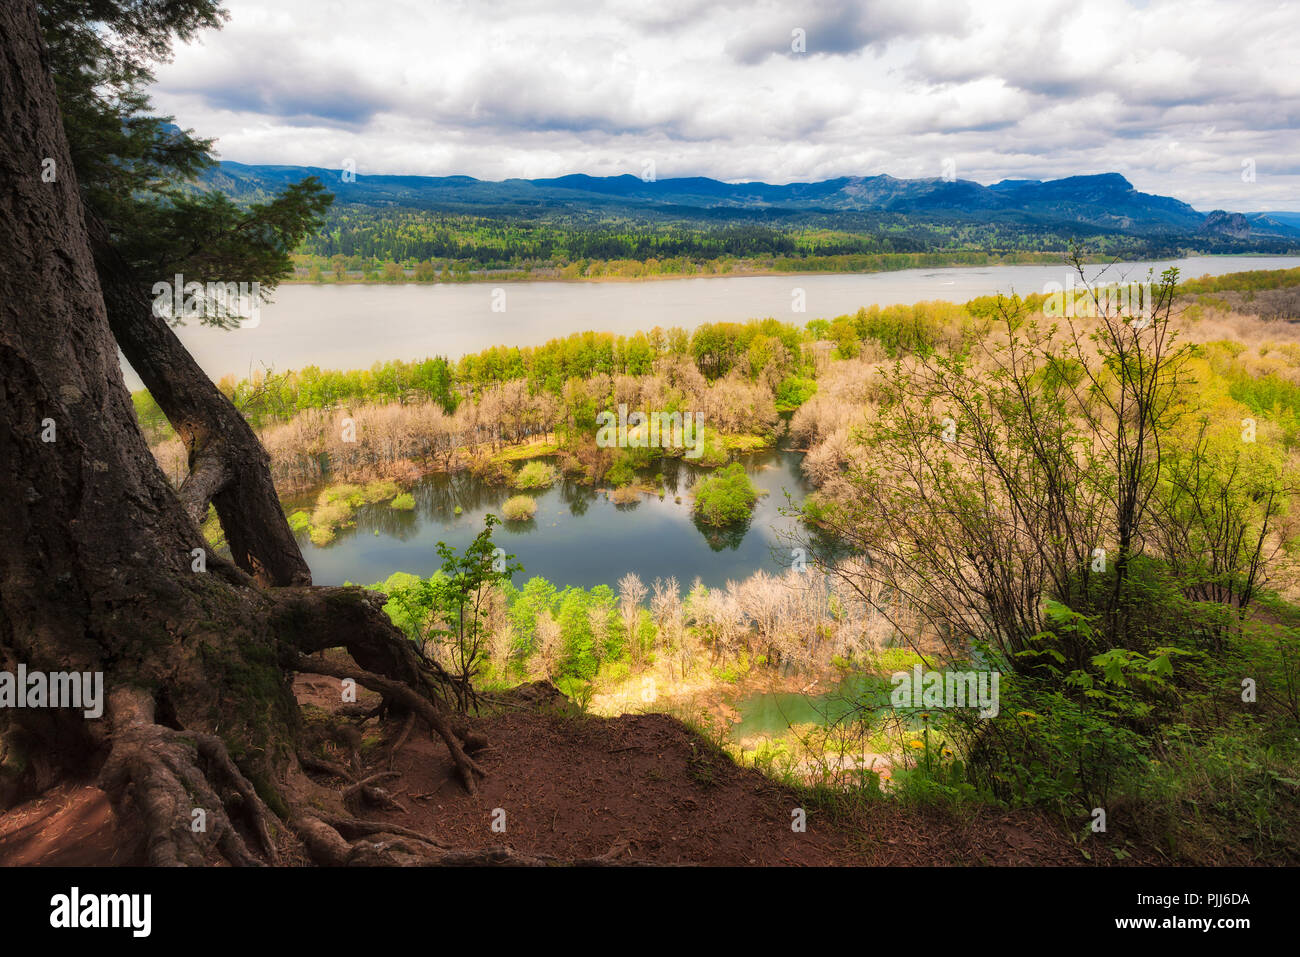 Hiking Ponytail Falls trail overlooking from the bluff a view of the Columbia River and spring flood waters Stock Photo